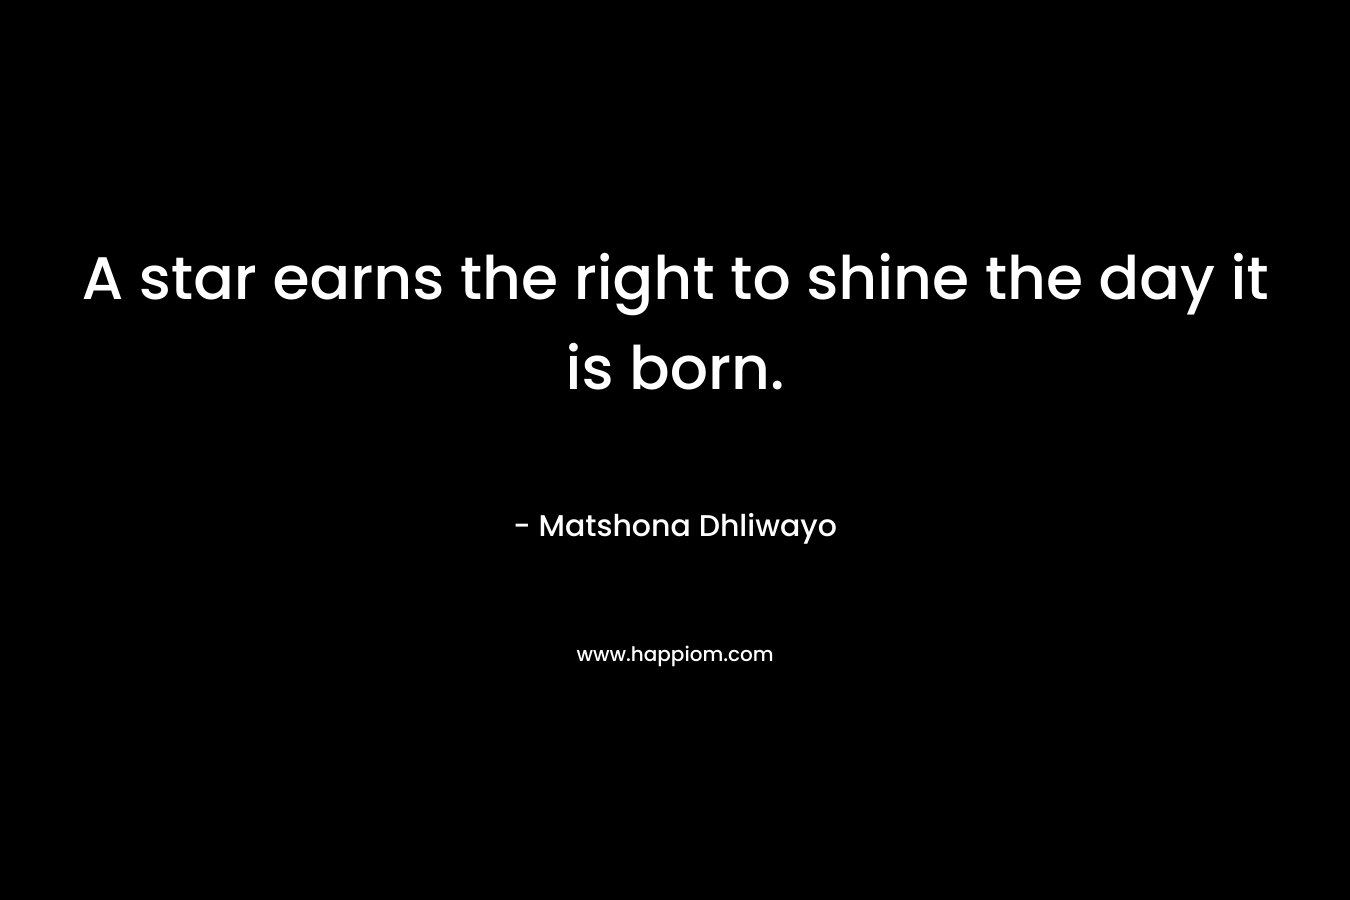 A star earns the right to shine the day it is born.